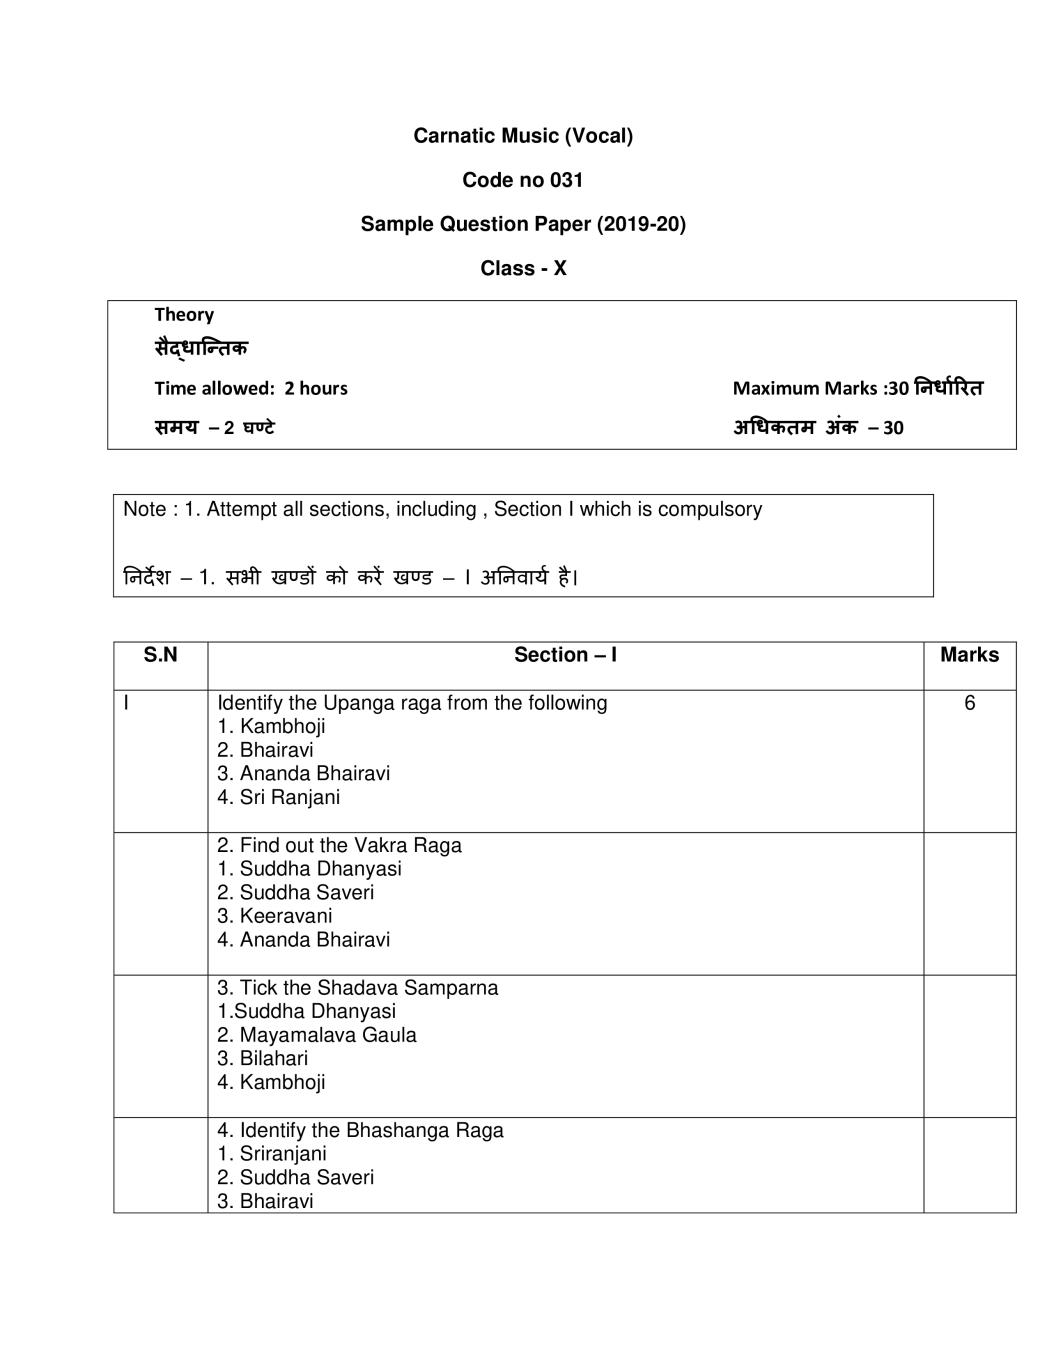 CBSE Class 10 Sample Paper 2020 for Carnatic Vocal - Page 1